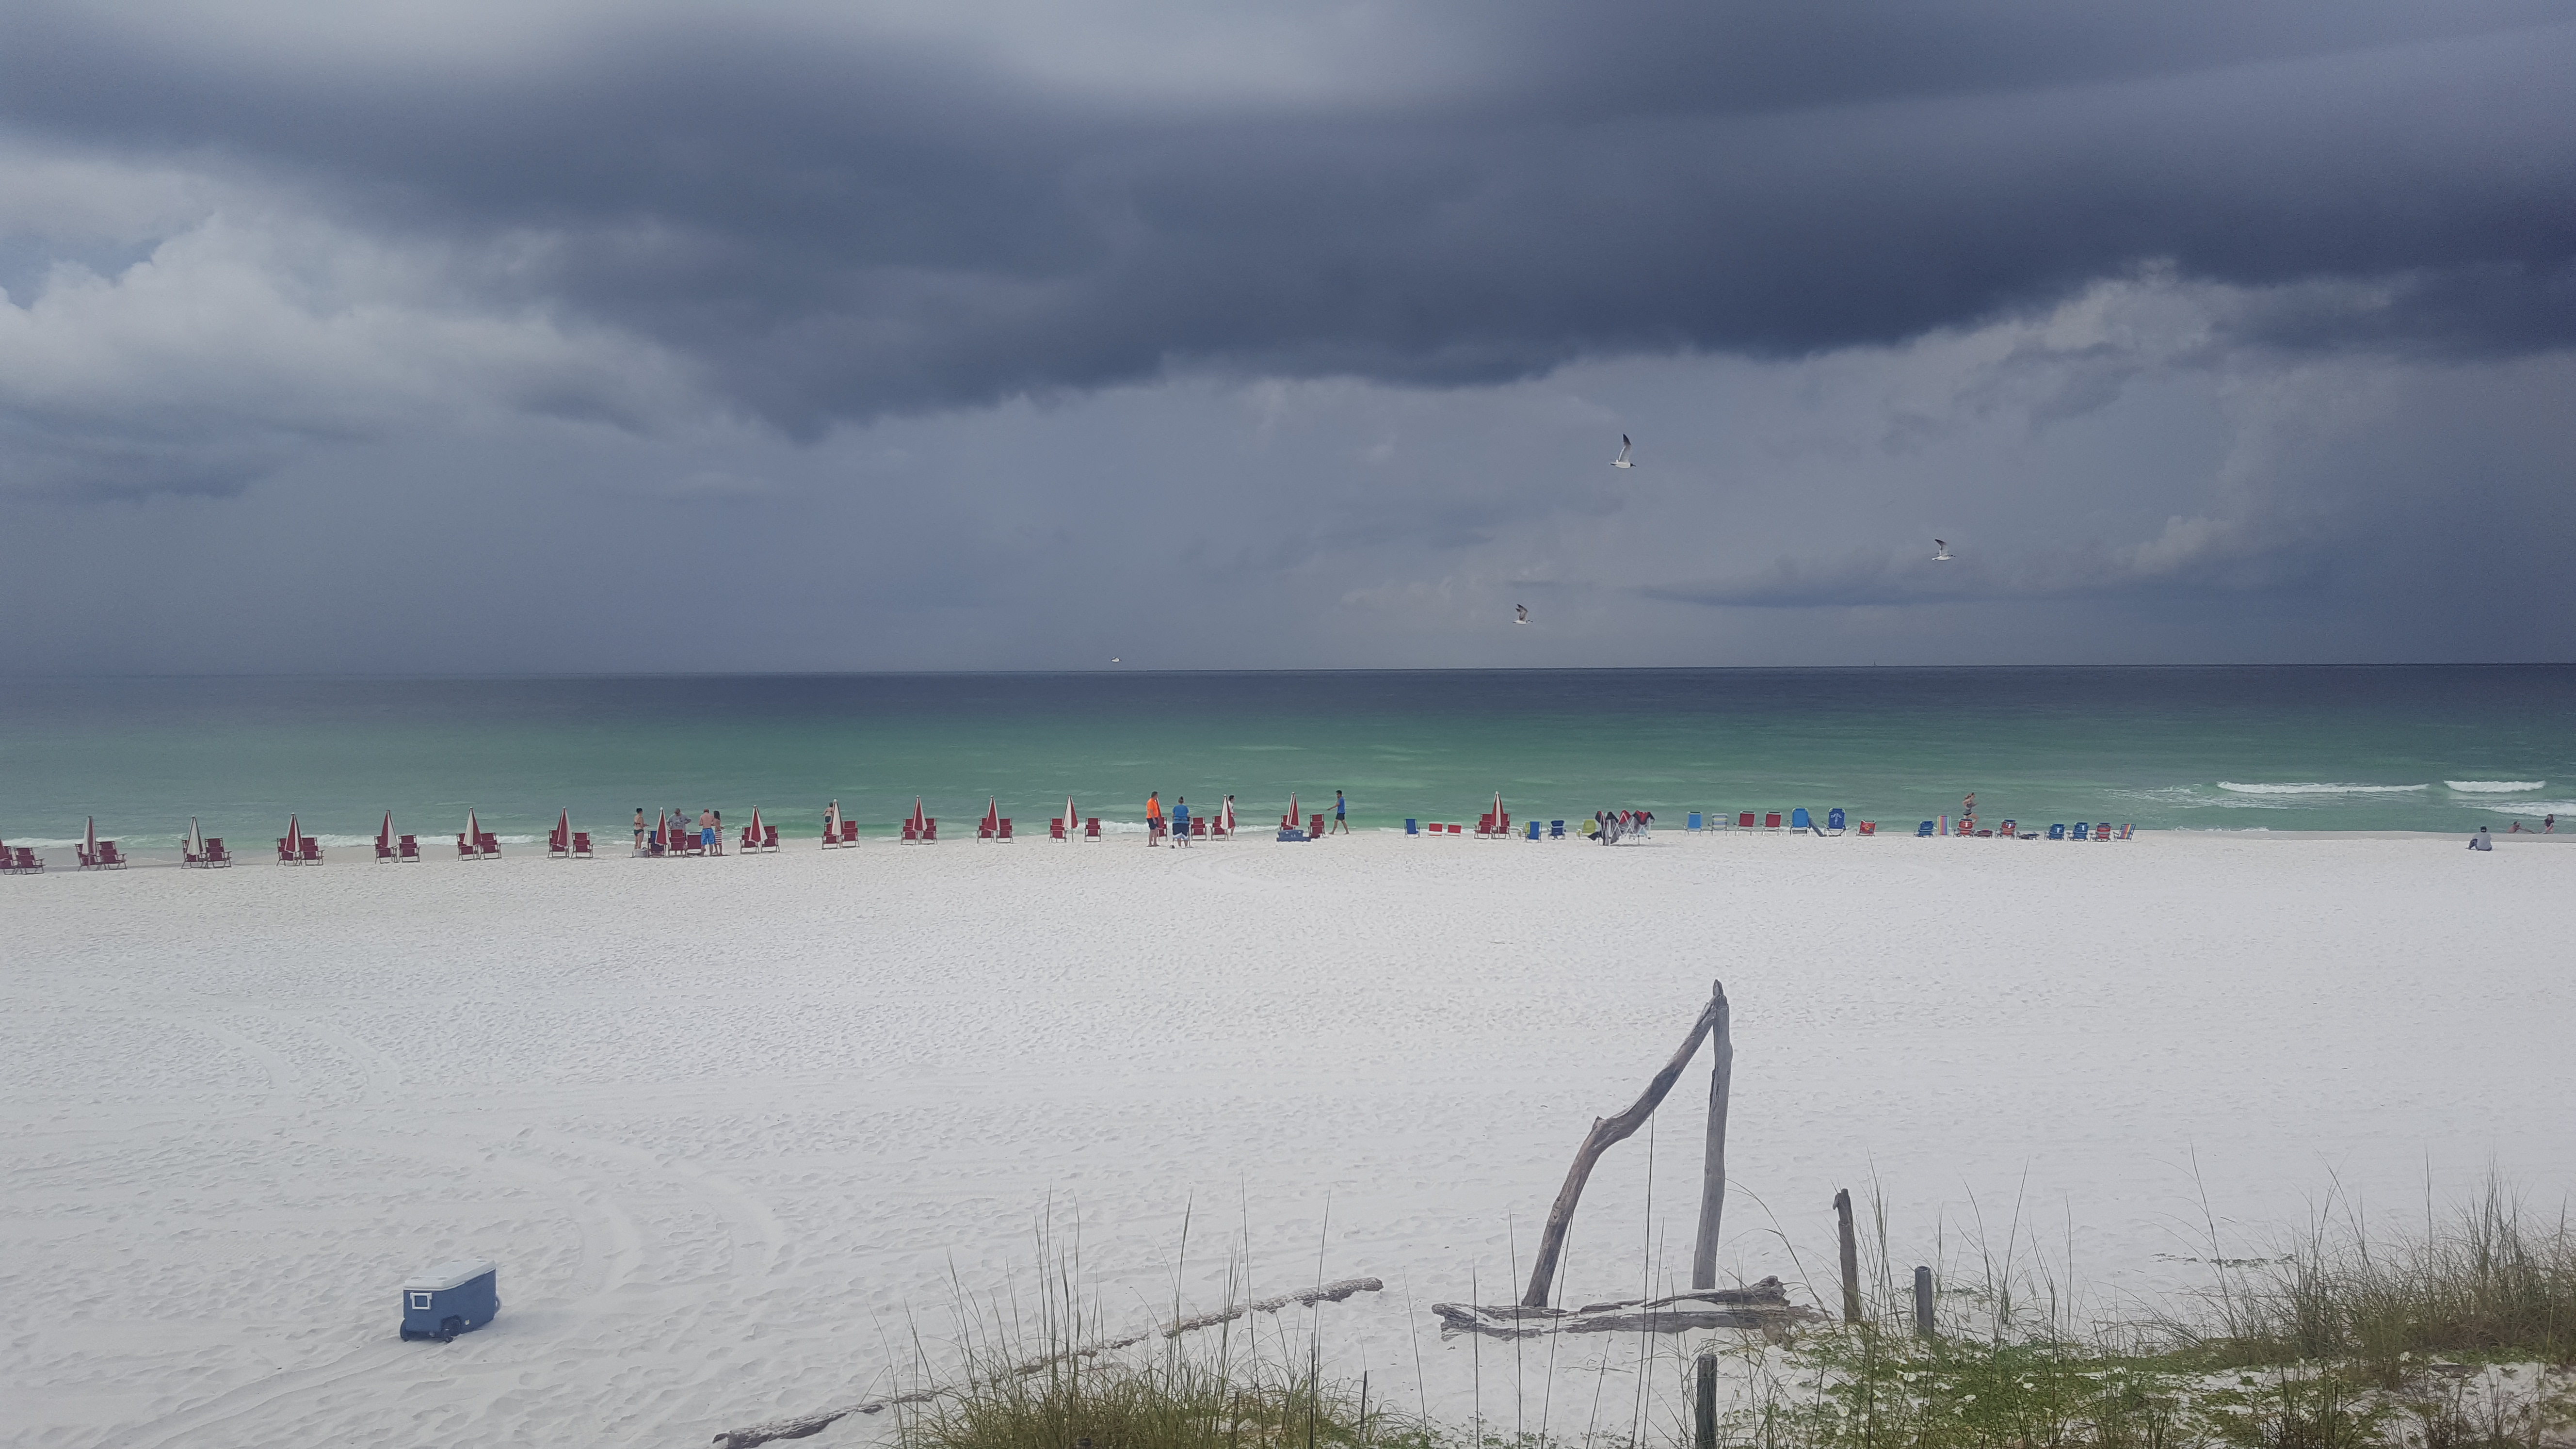 Beach in Destin with a storm in the background